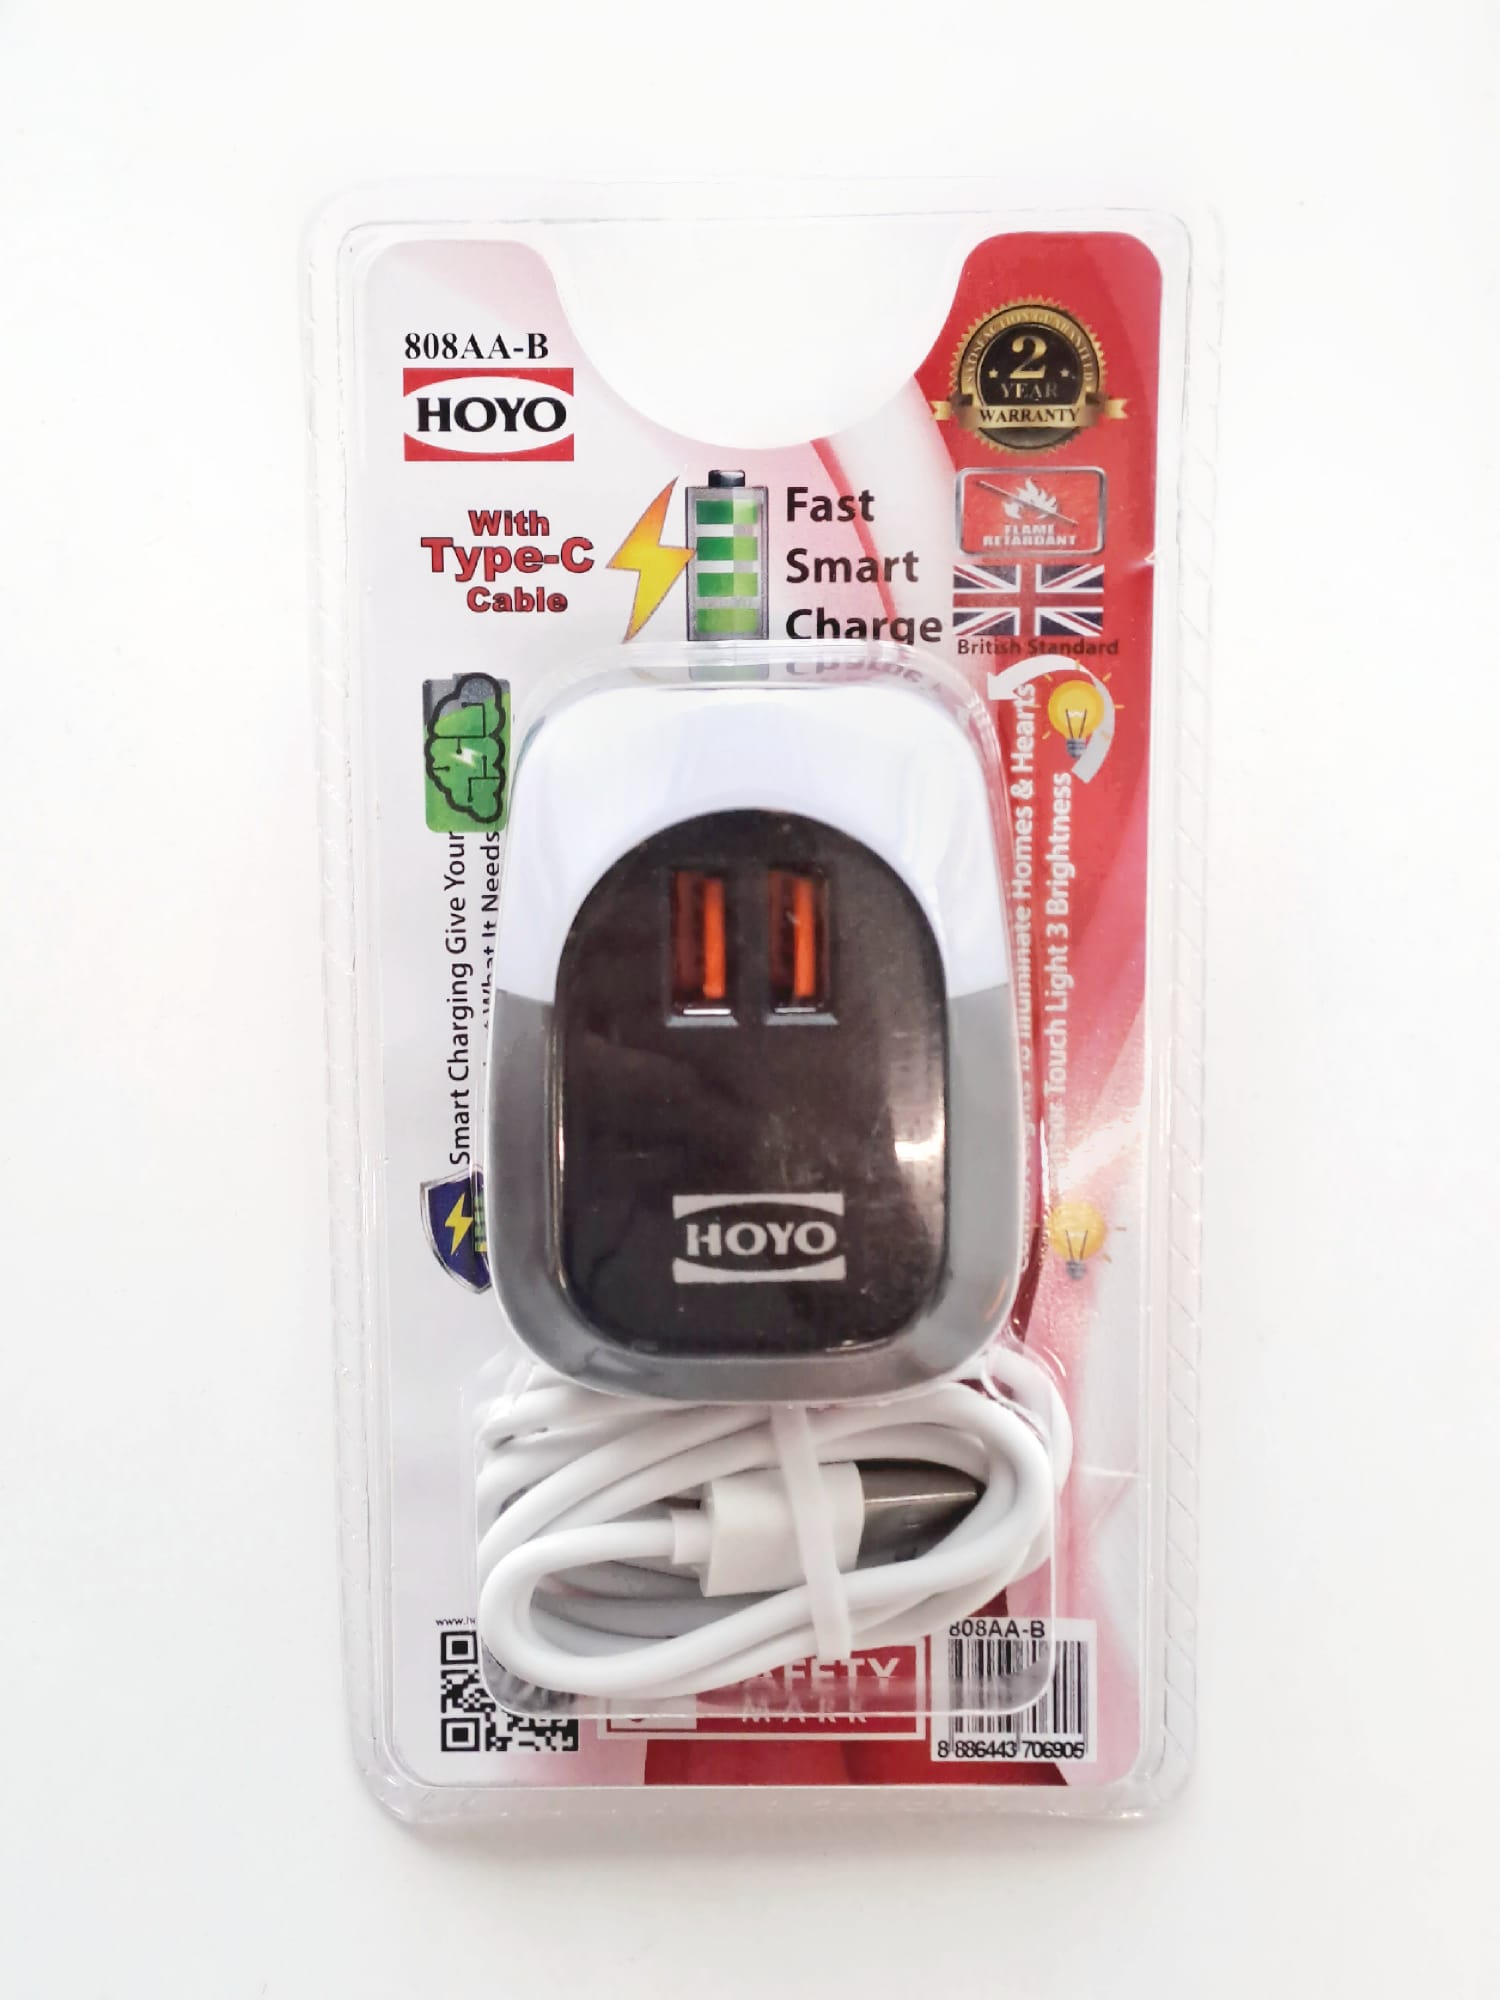 Hoyo 2 USB Ports Charger with White Night Light (Type C cable included)